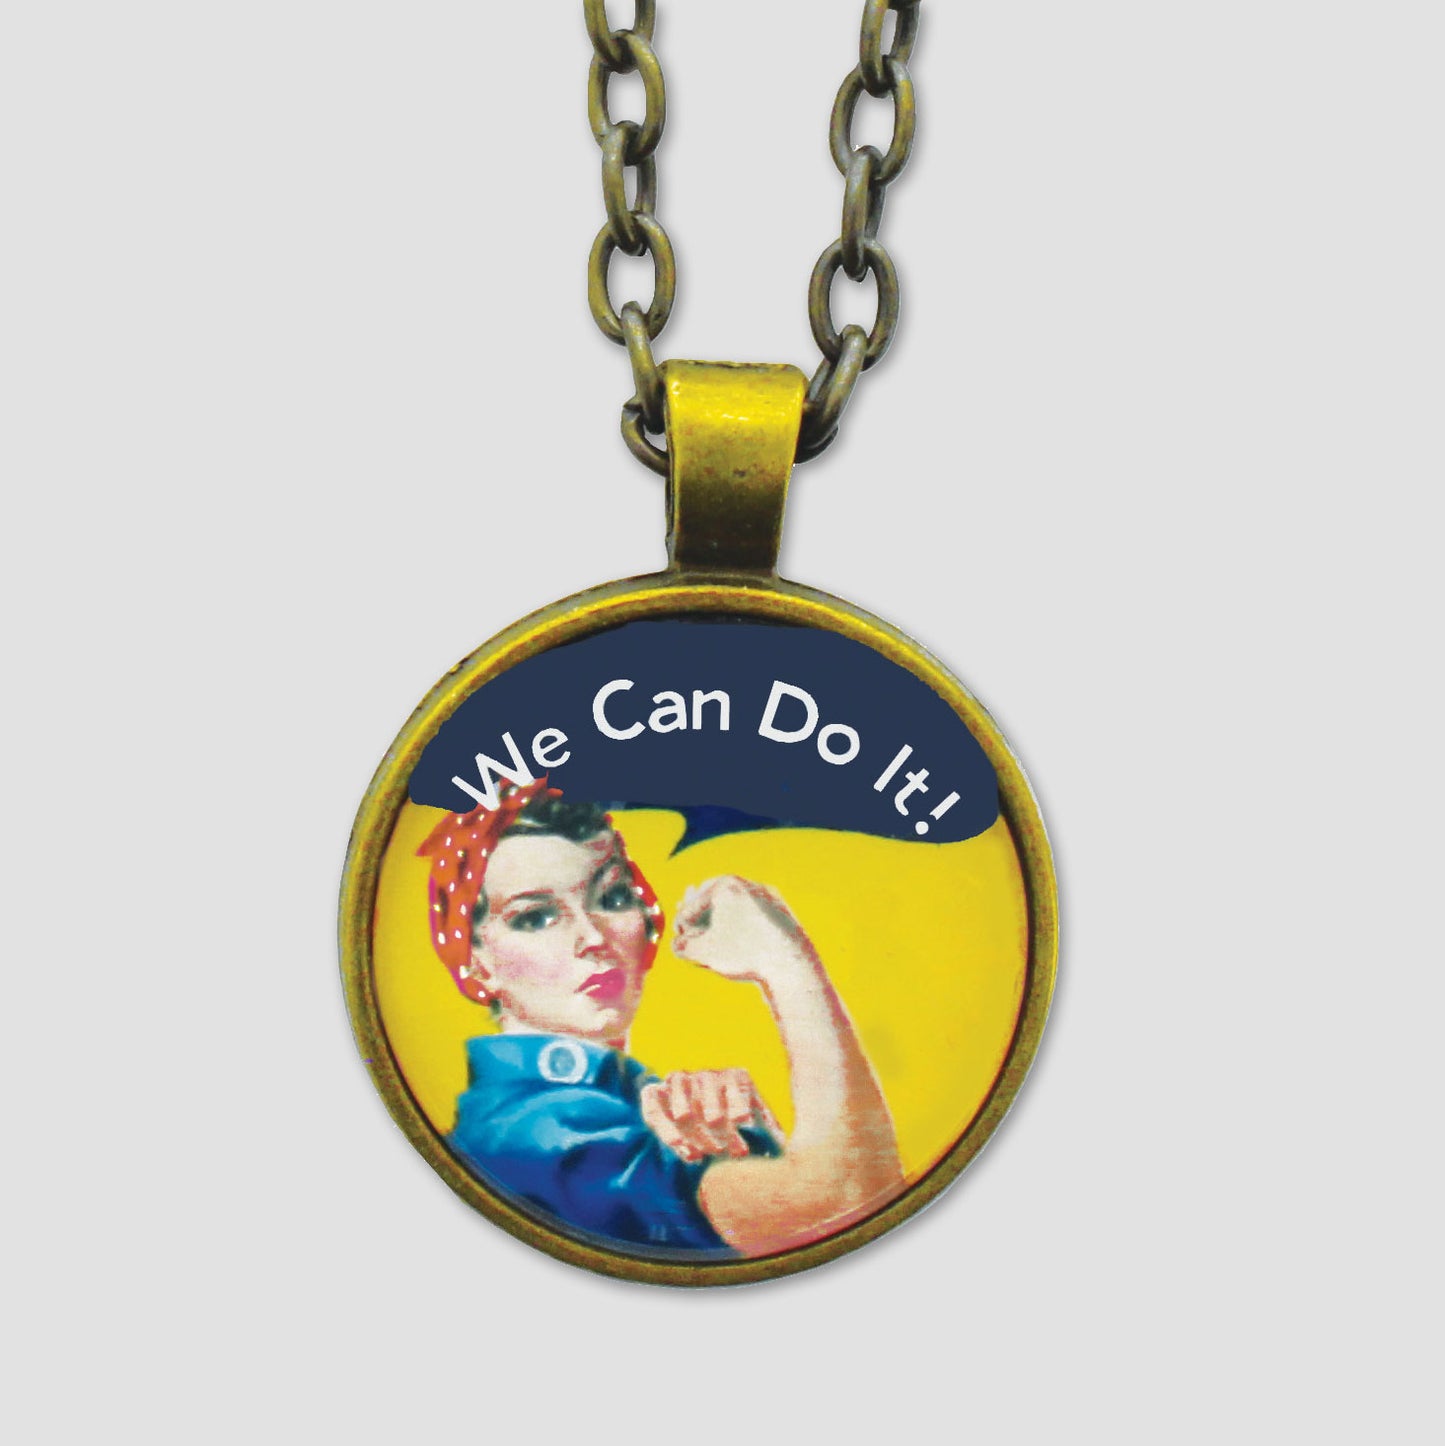 Rosie We Can Do It! Necklace